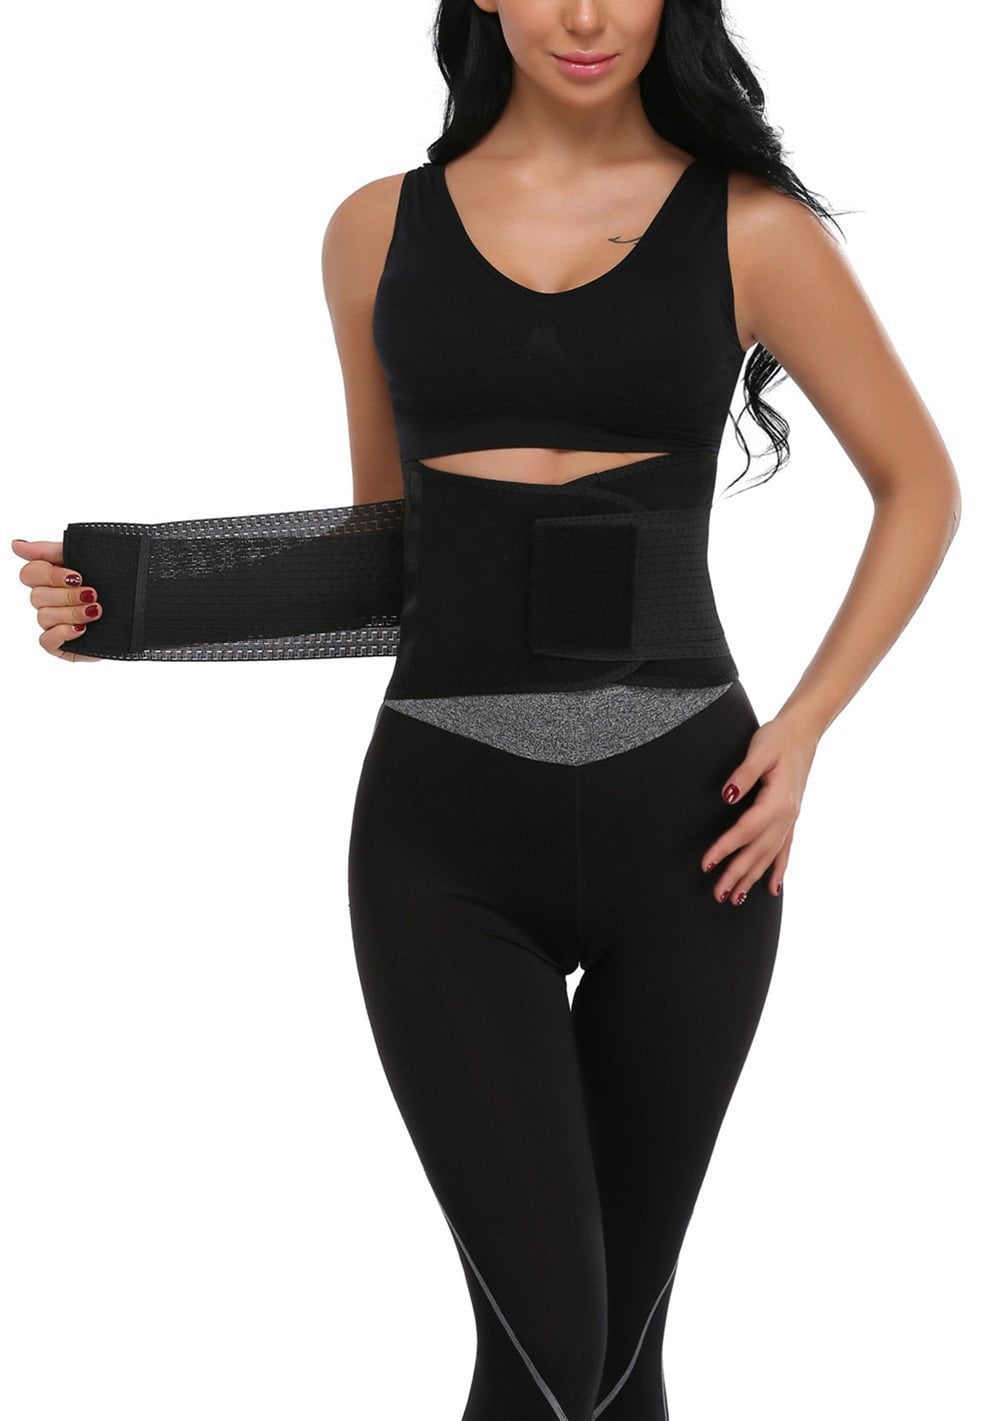 Waist Trainer for Weight-Loss Body Shaping Exercise Belt for Abs Sashas Best Waist Trimmer/Sweat Slimmer Corset for Men